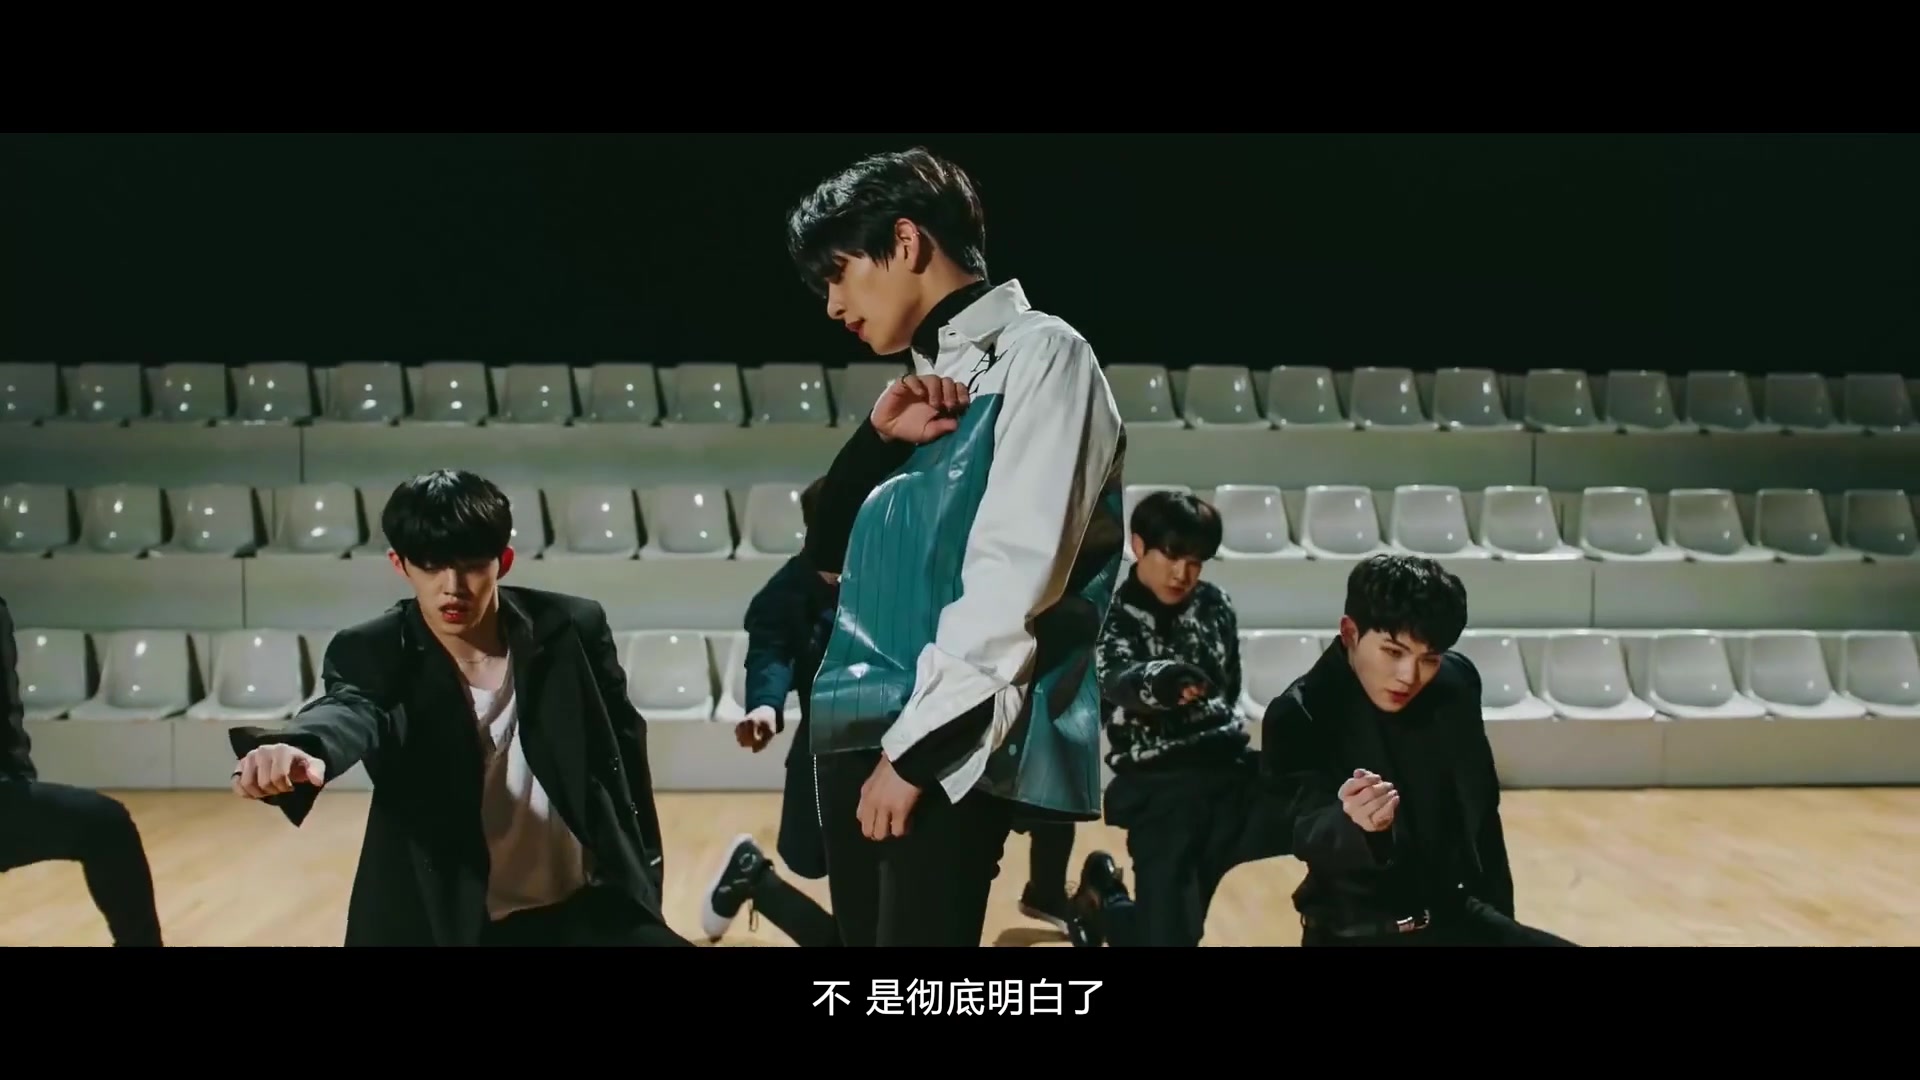 【SEVENTEEN】I Don't Know -或许吧